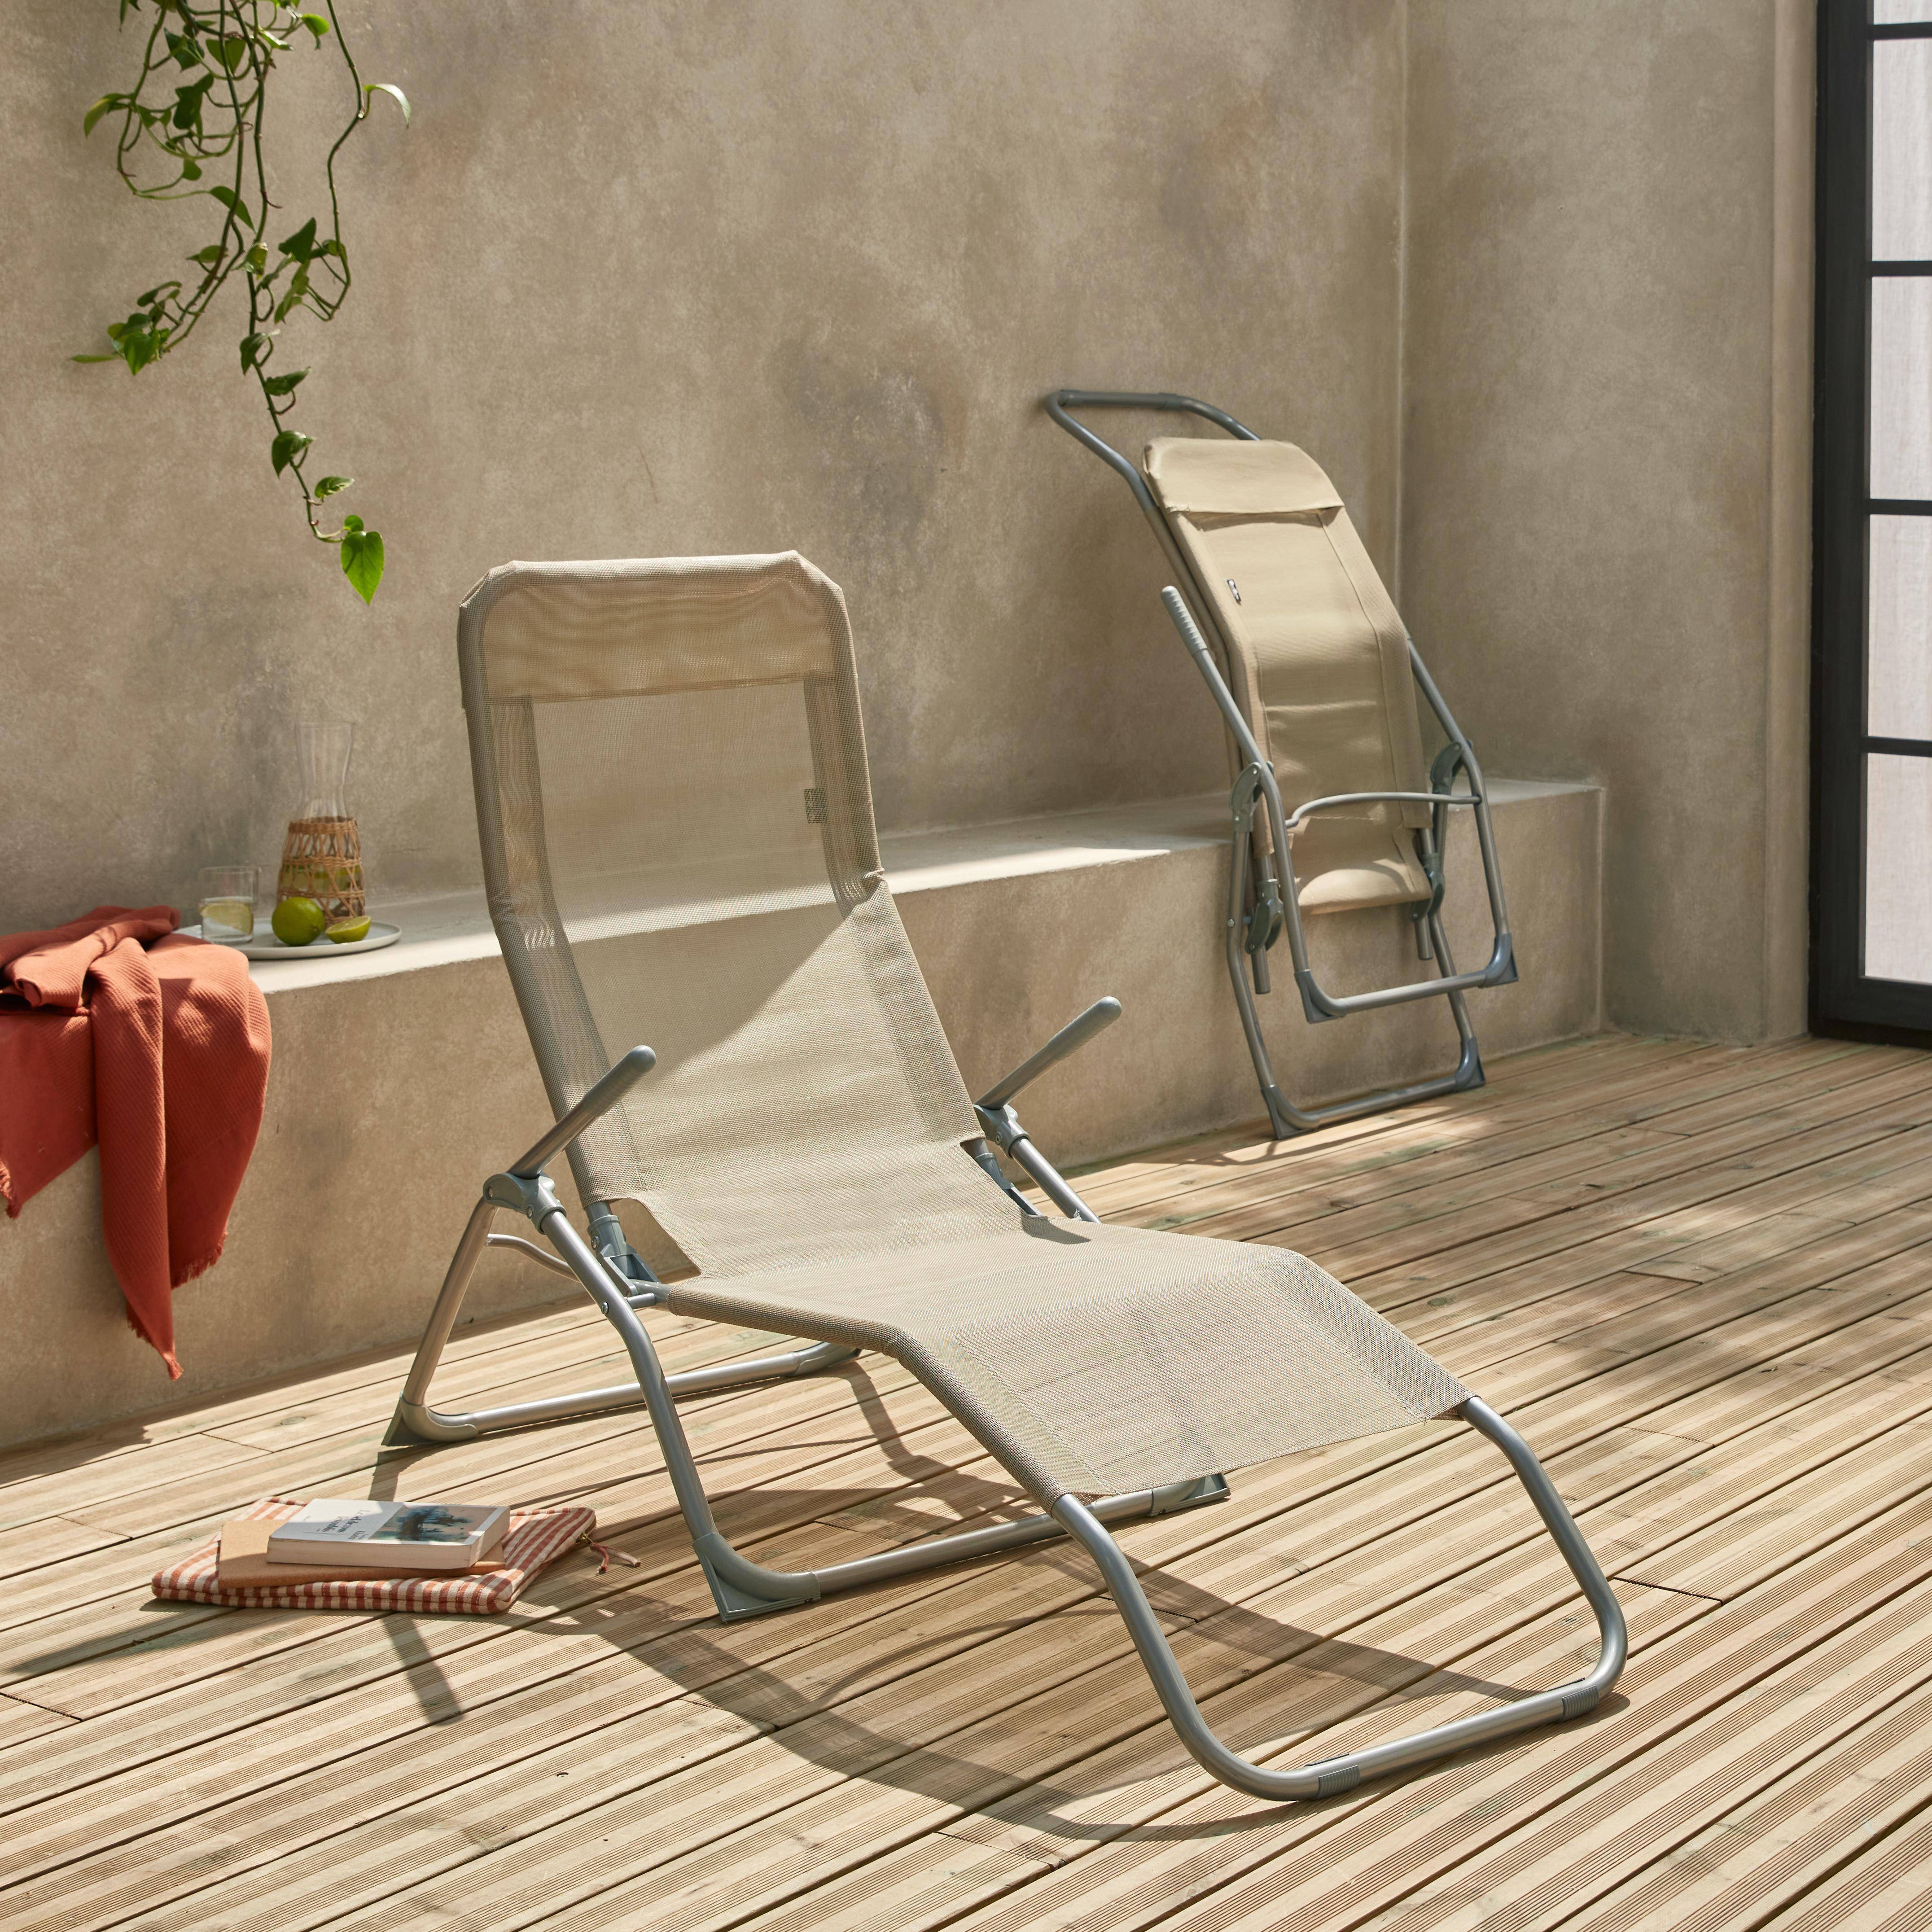 Set of 2 textilene sun loungers - 2 positions - Levito - Taupe,sweeek,Photo2